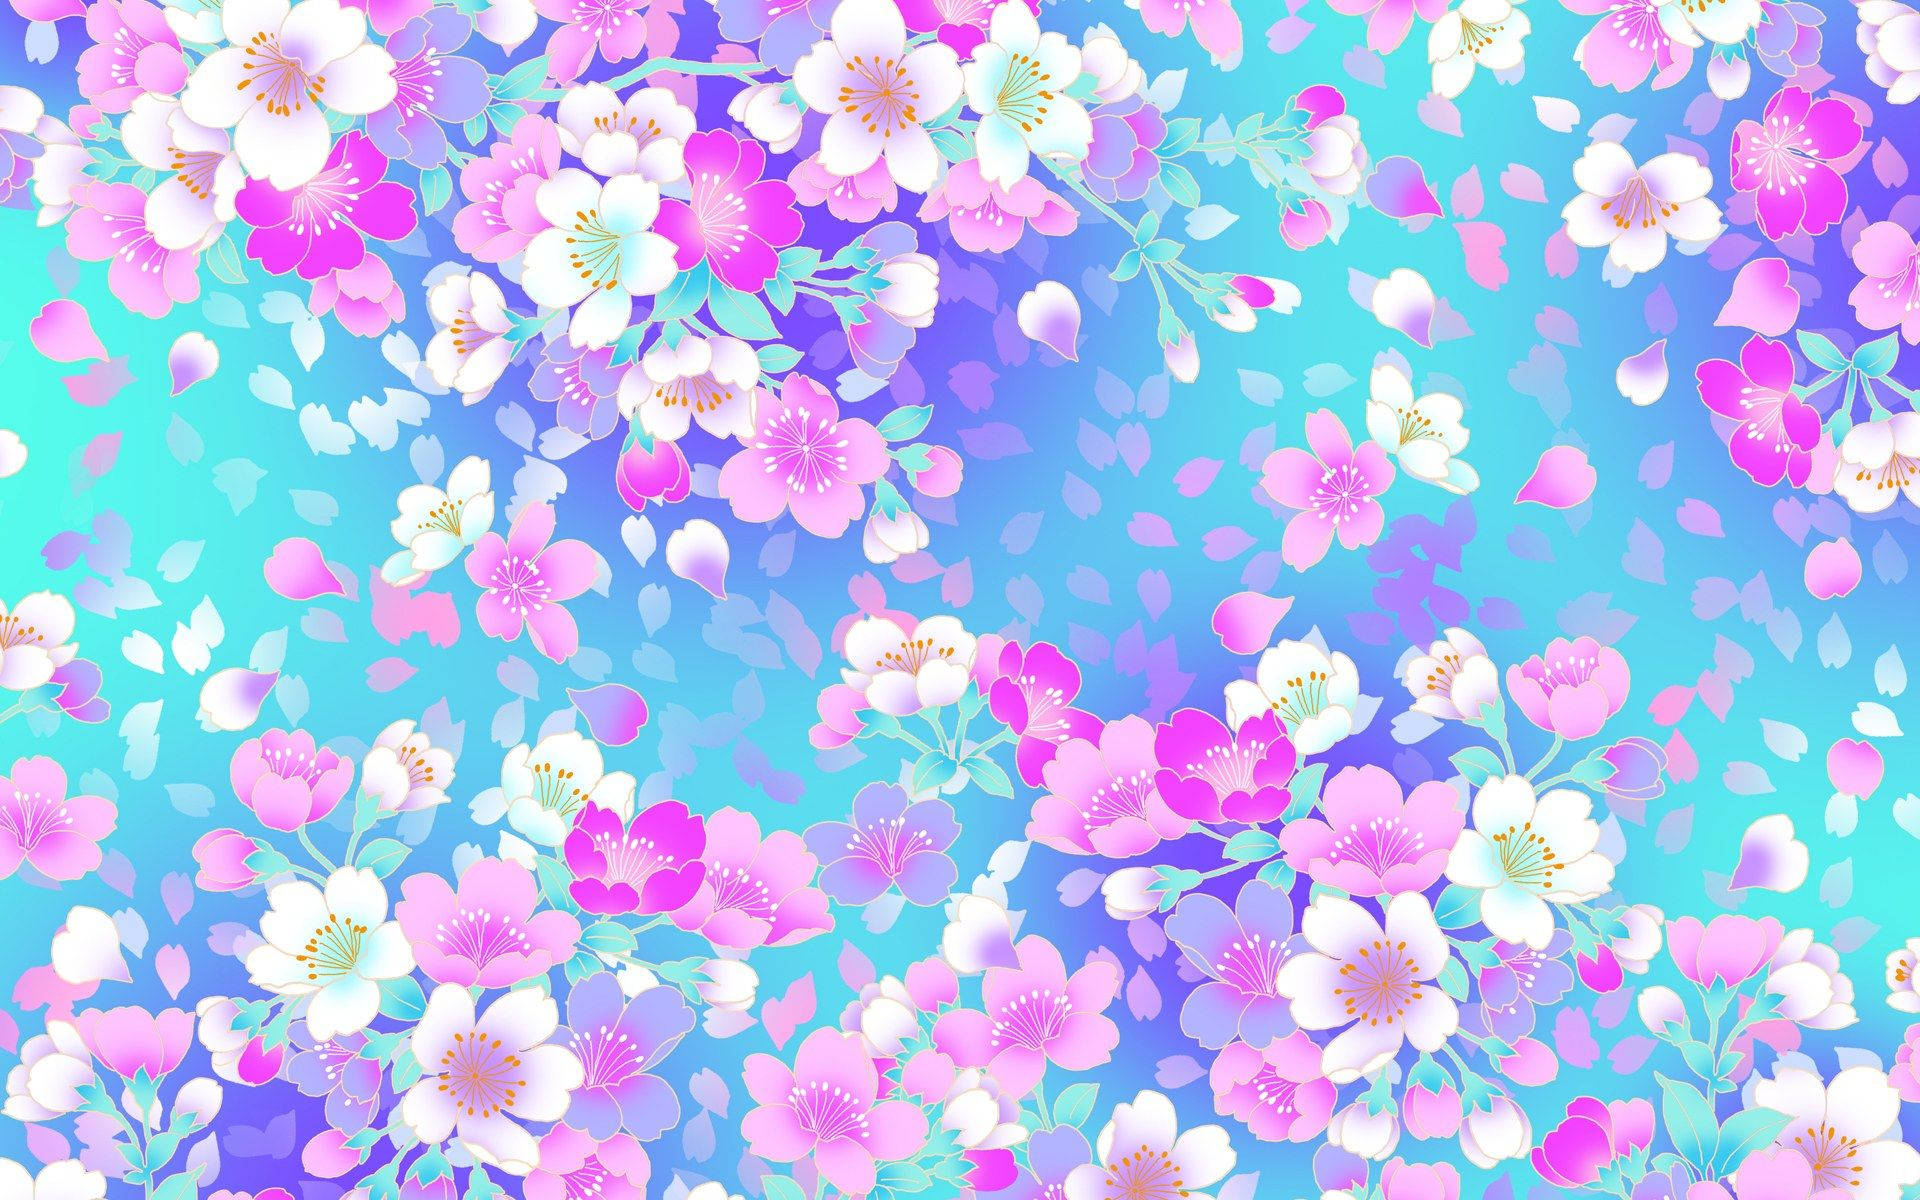 A beautiful, purple and white abstract flower pattern. Wallpaper